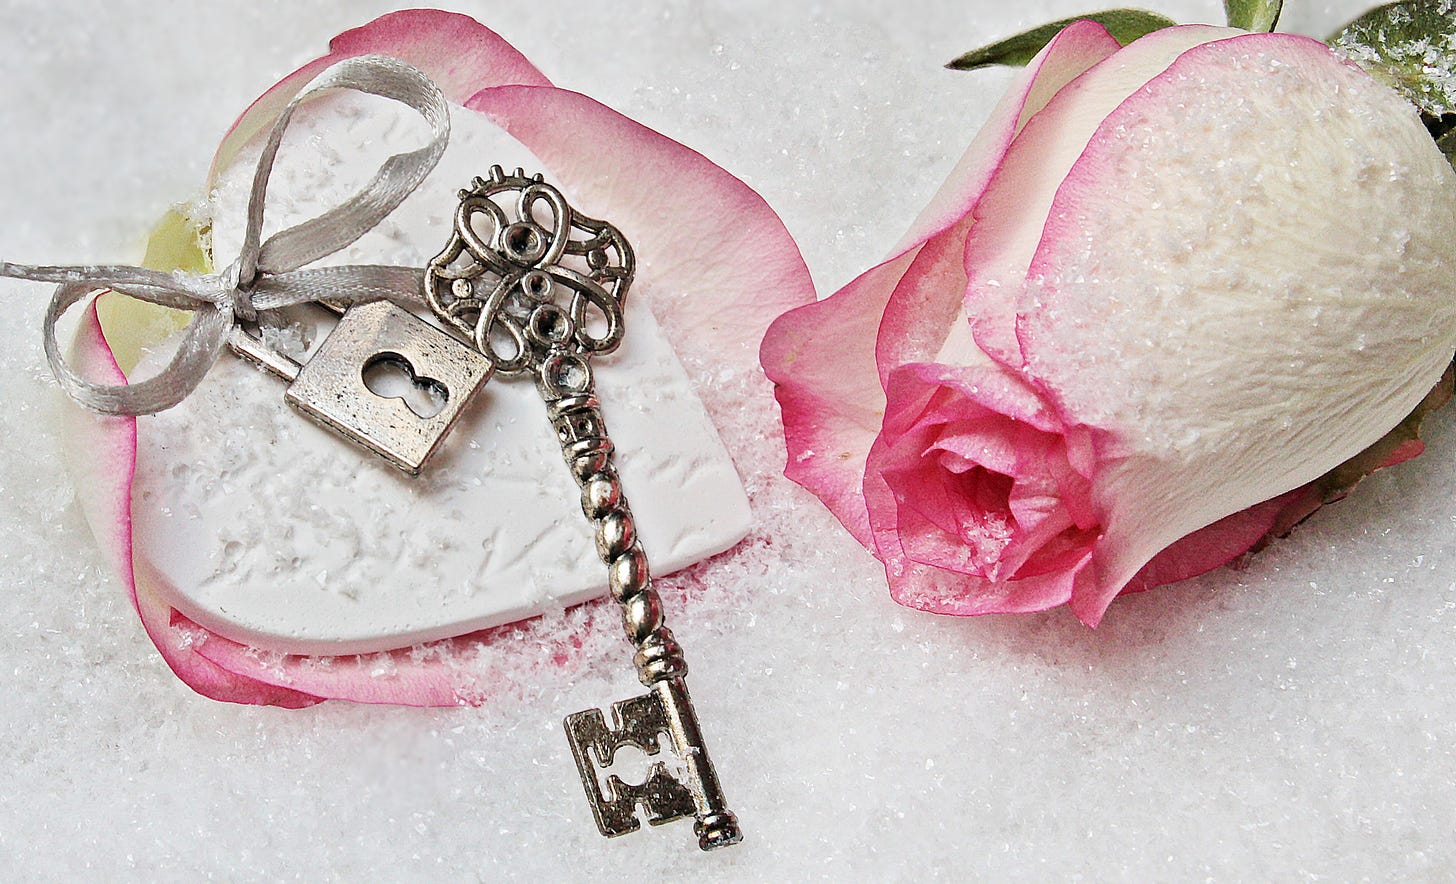 silver antique key with silver lock and white rose with pink tips on the petals